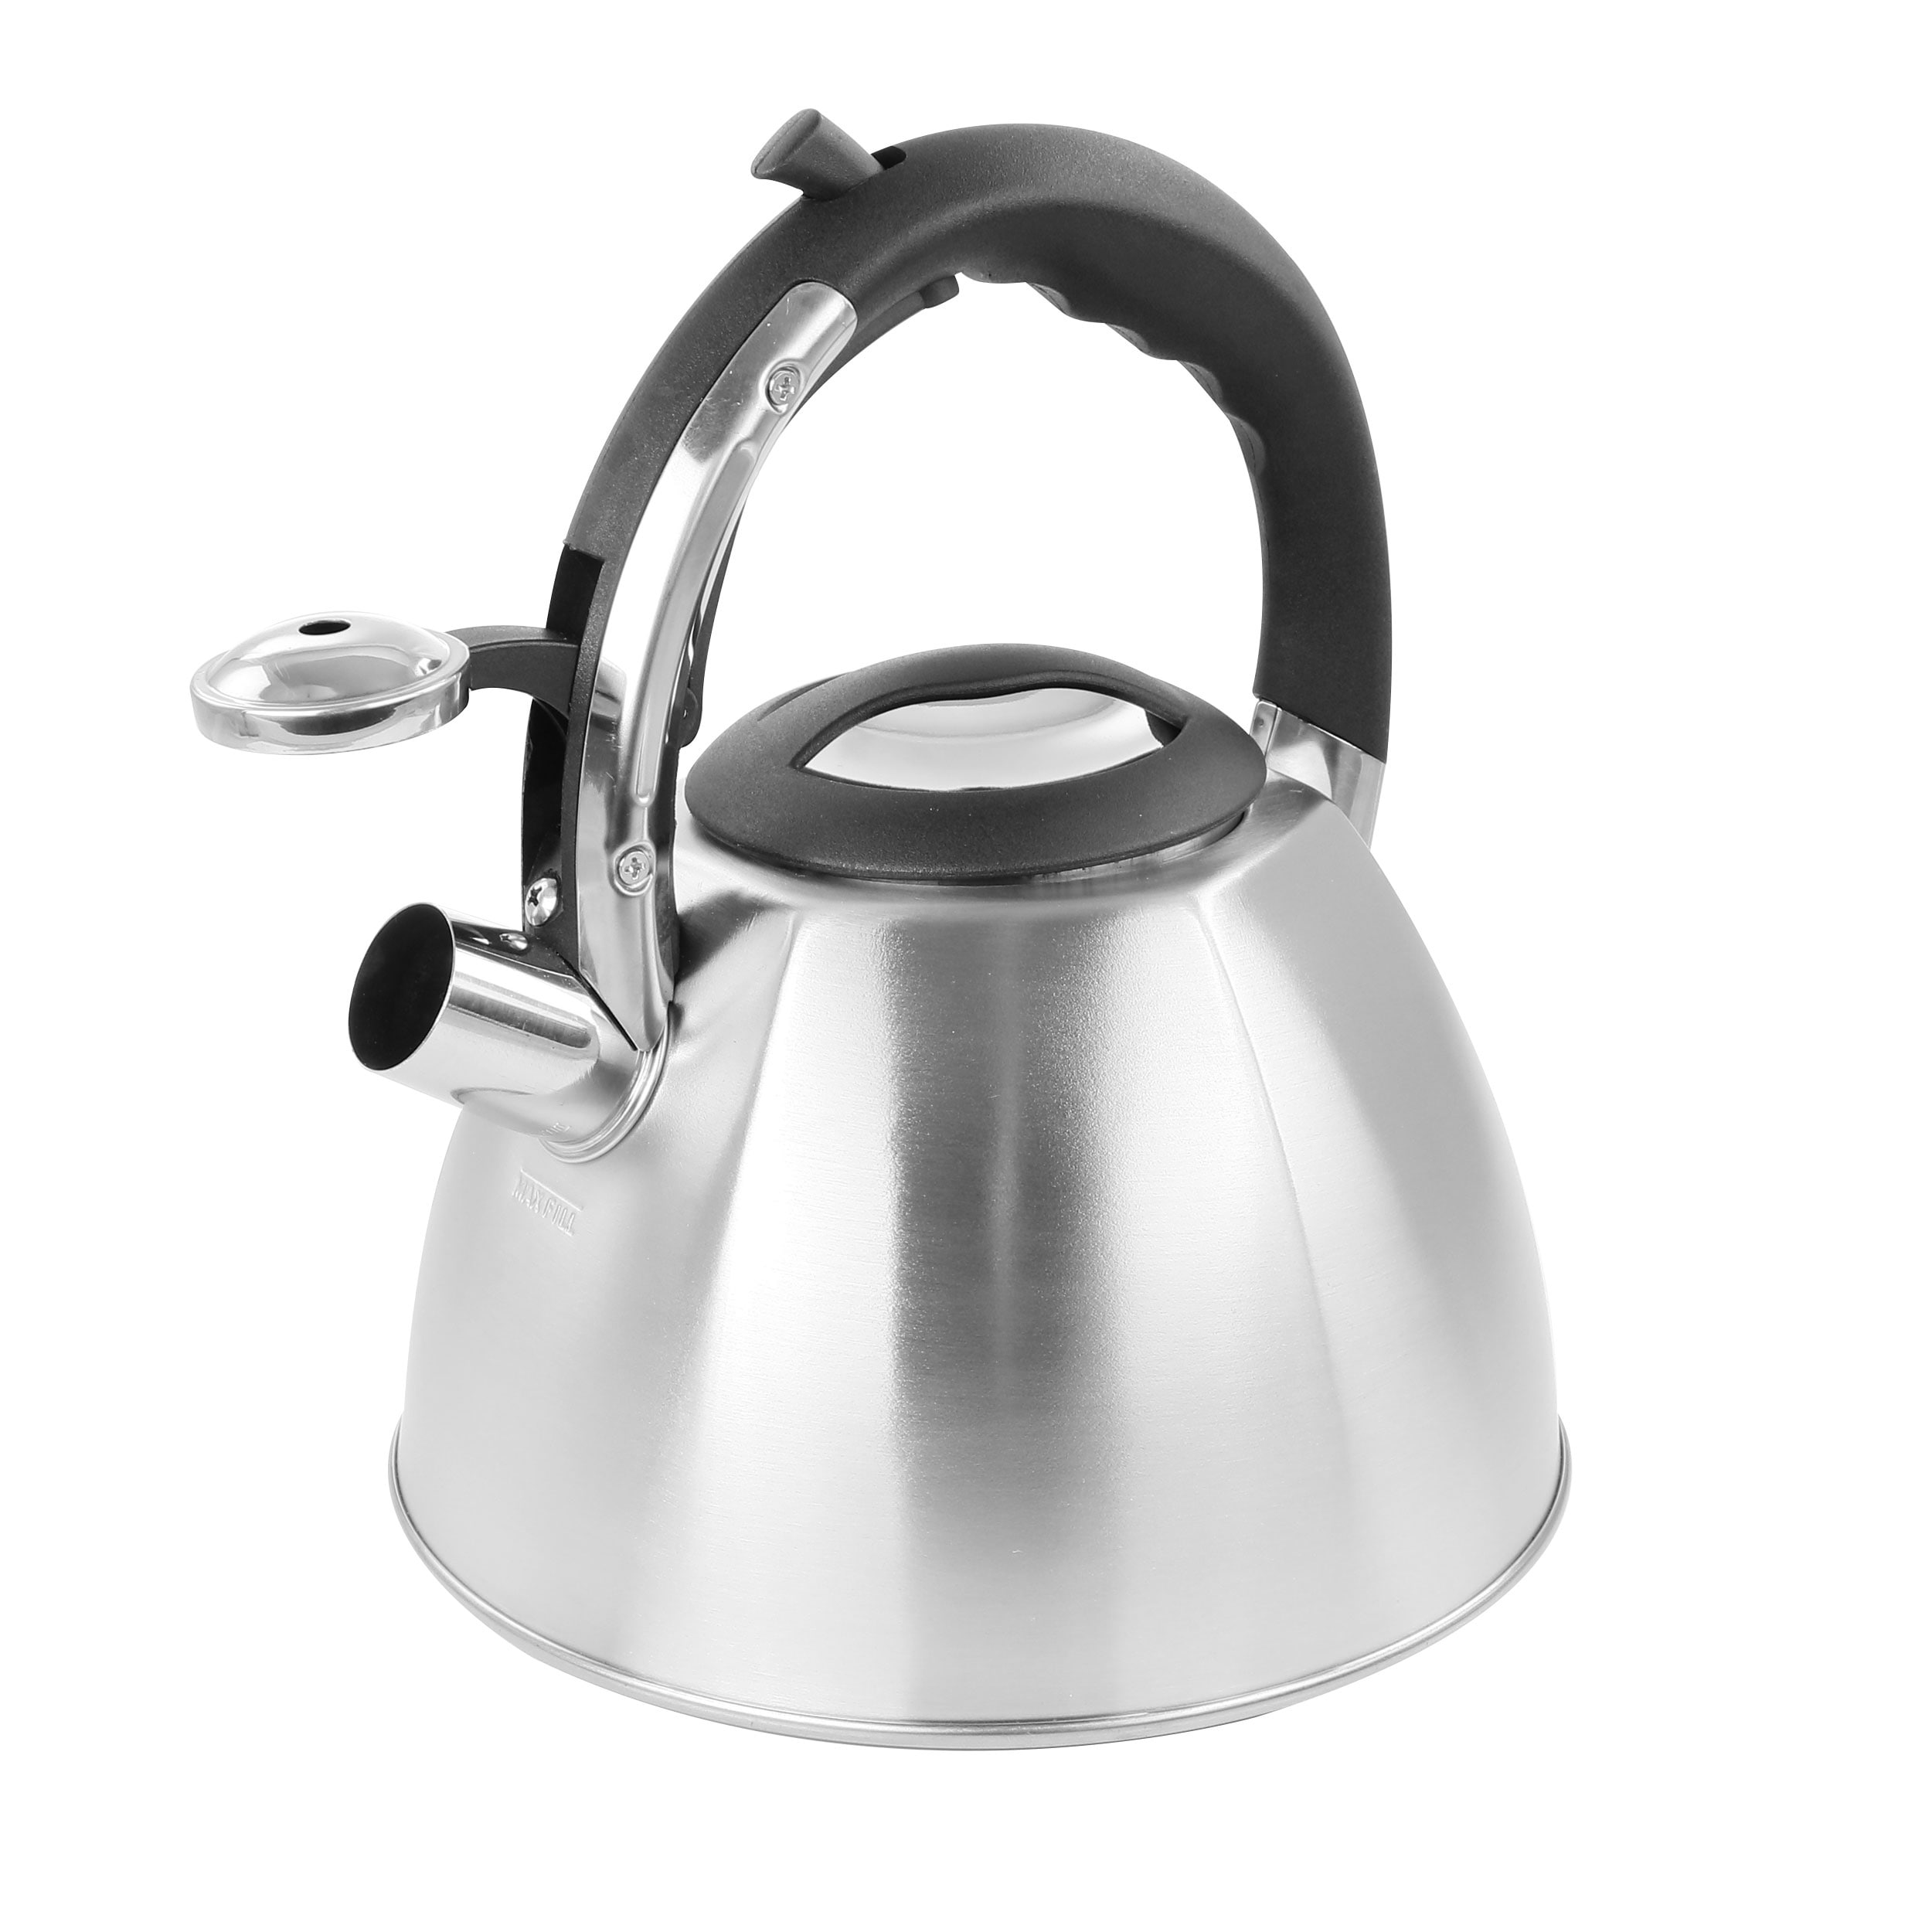 https://ak1.ostkcdn.com/images/products/is/images/direct/bc3410b648ef746cead3f6b399e1ae3fdde0492d/Mr.-Coffee-3-Quart-Stainless-Steel-Whistling-Tea-Kettle.jpg